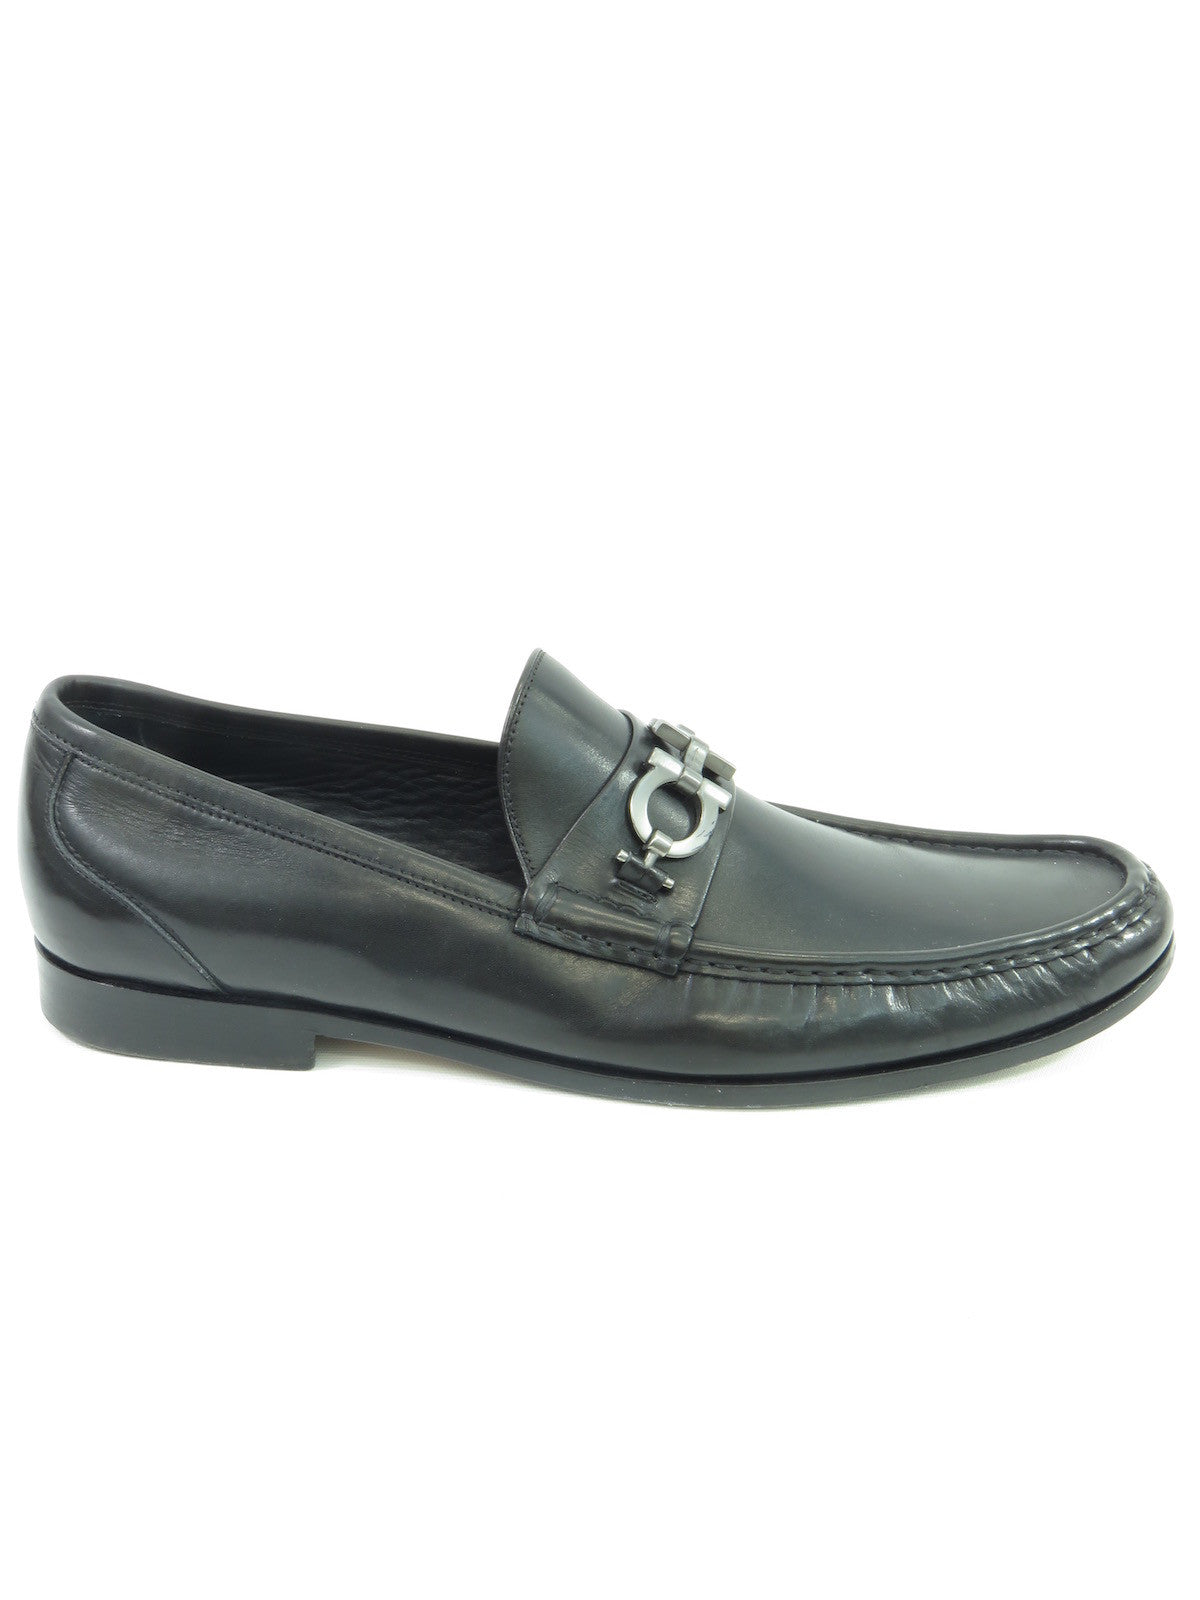 mens black loafers with silver buckle